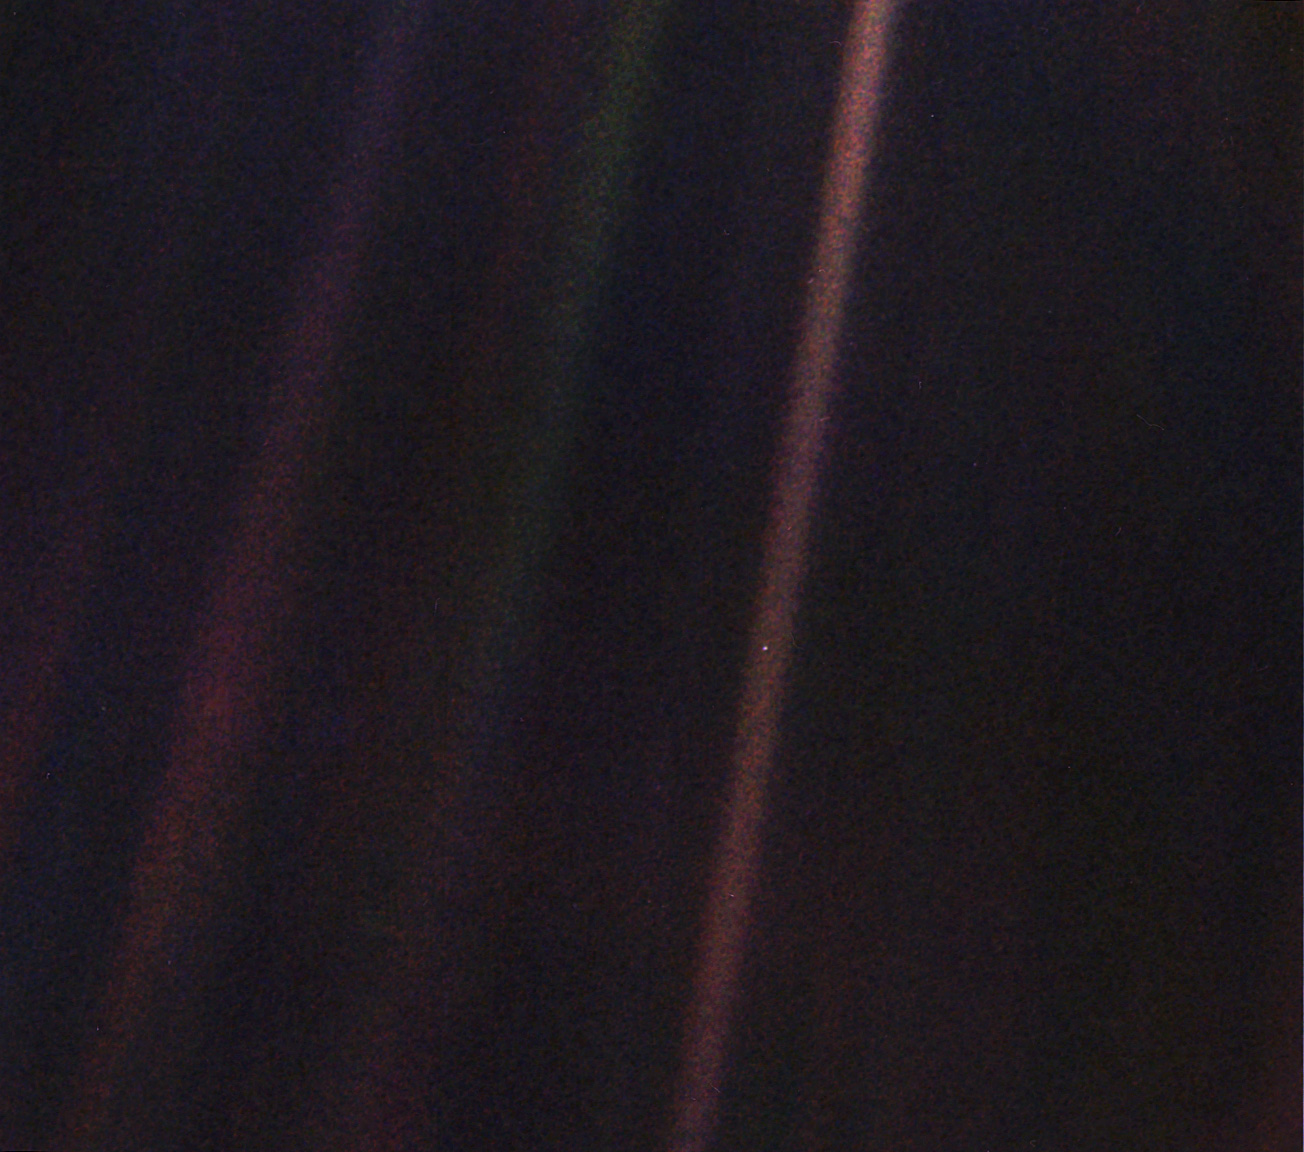 Photograph of Earth taken on Feb. 14, 1990, by NASA’s Voyager 1 spacecraft.